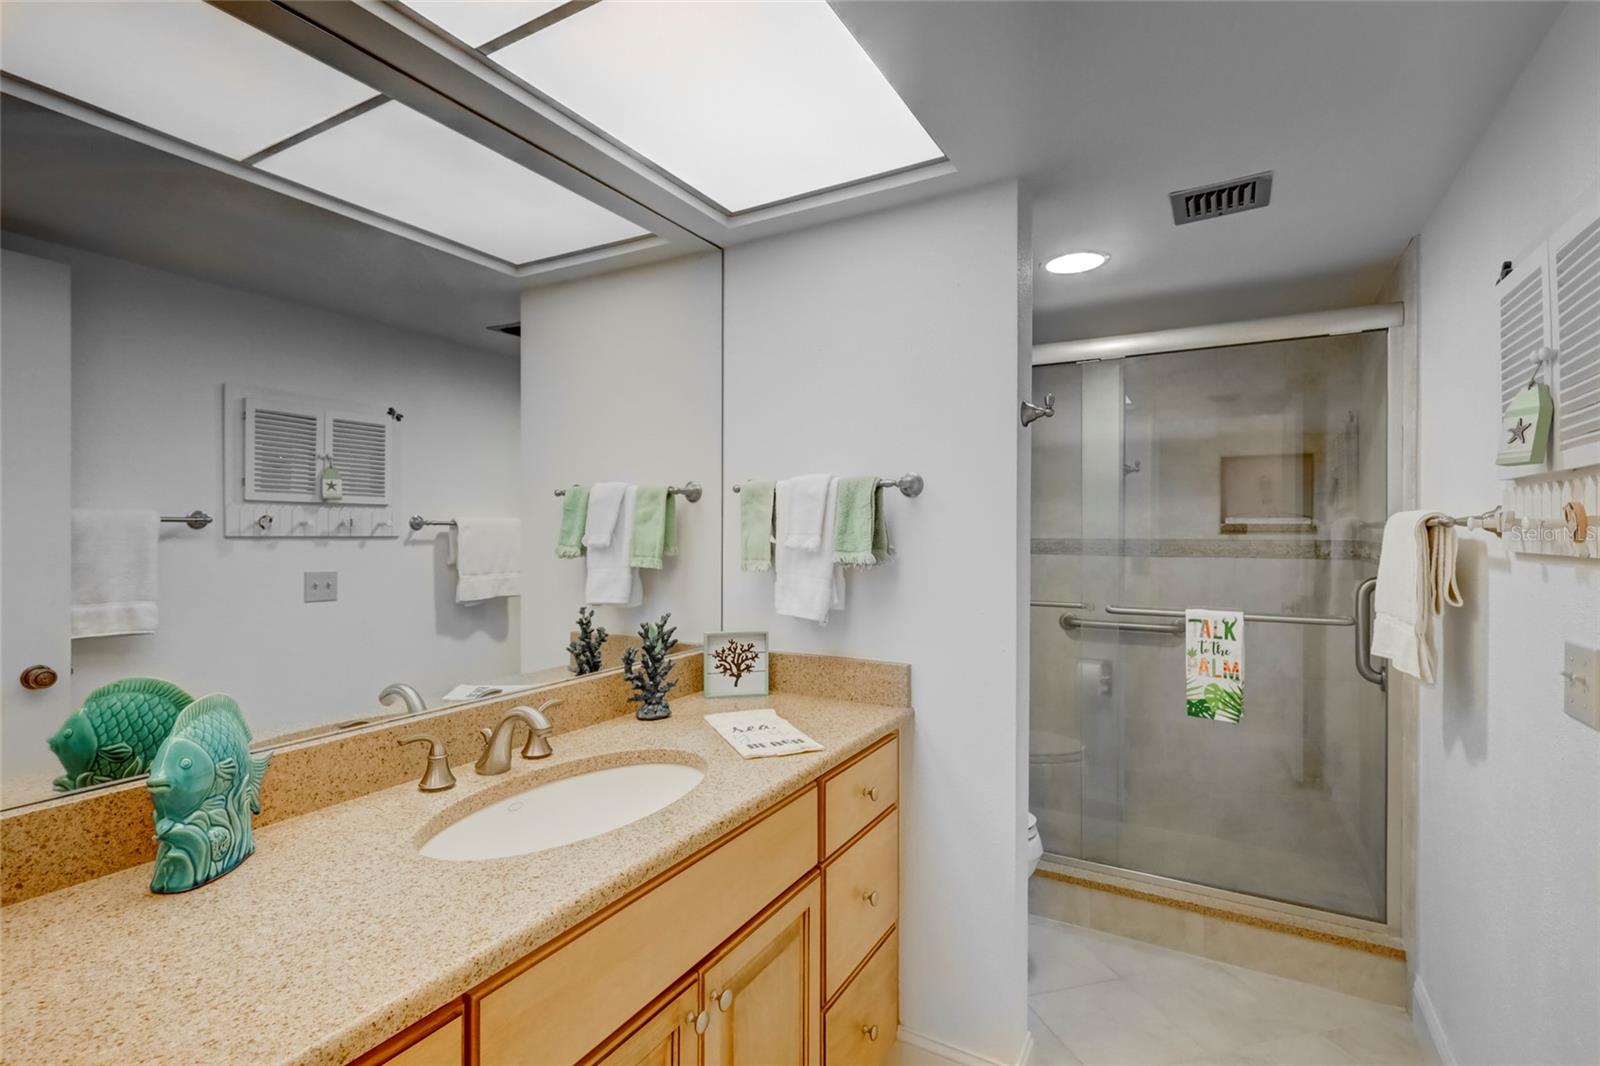 the Guest bathroom has plenty of counter space and a walk in shower